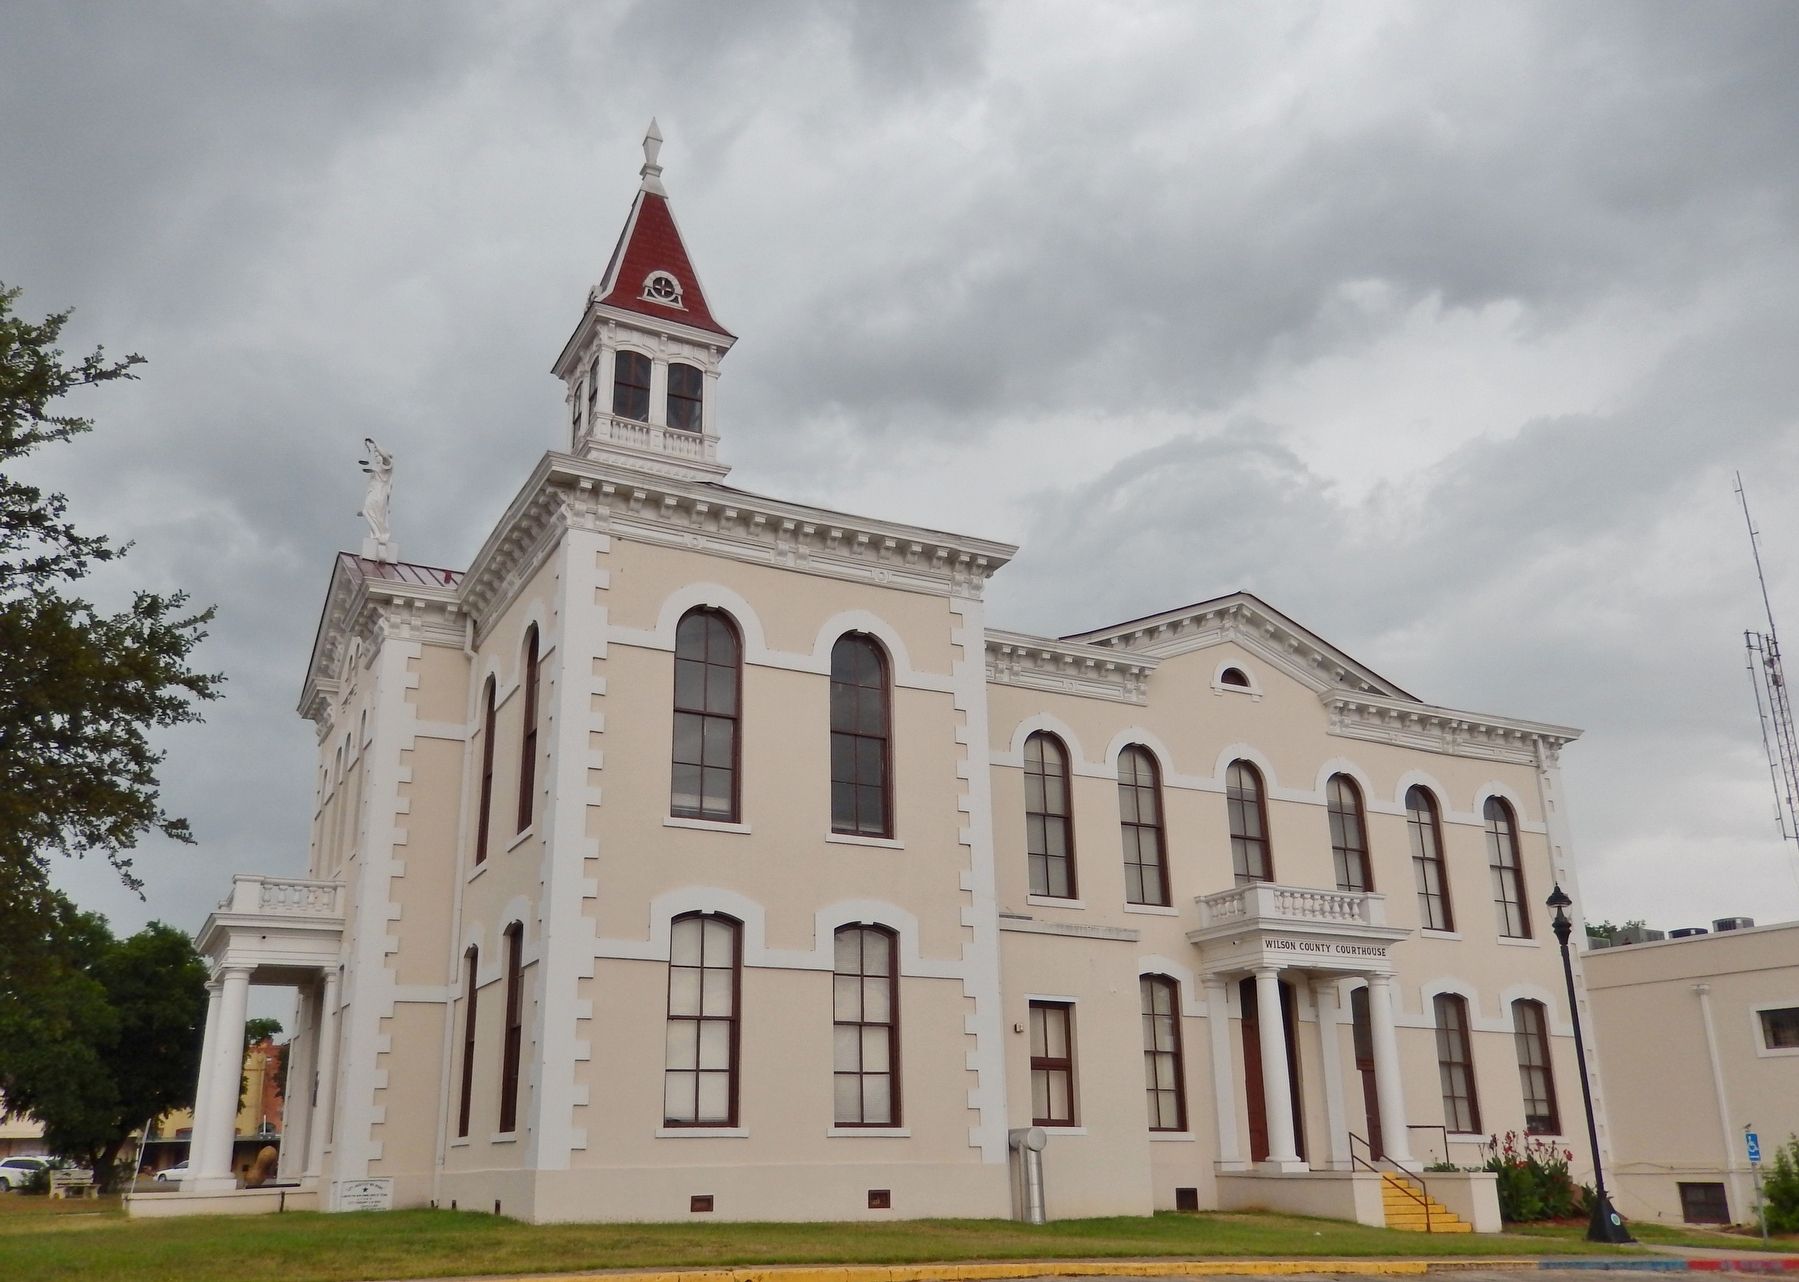 Wilson County Courthouse (<i>south side view</i>) image. Click for full size.